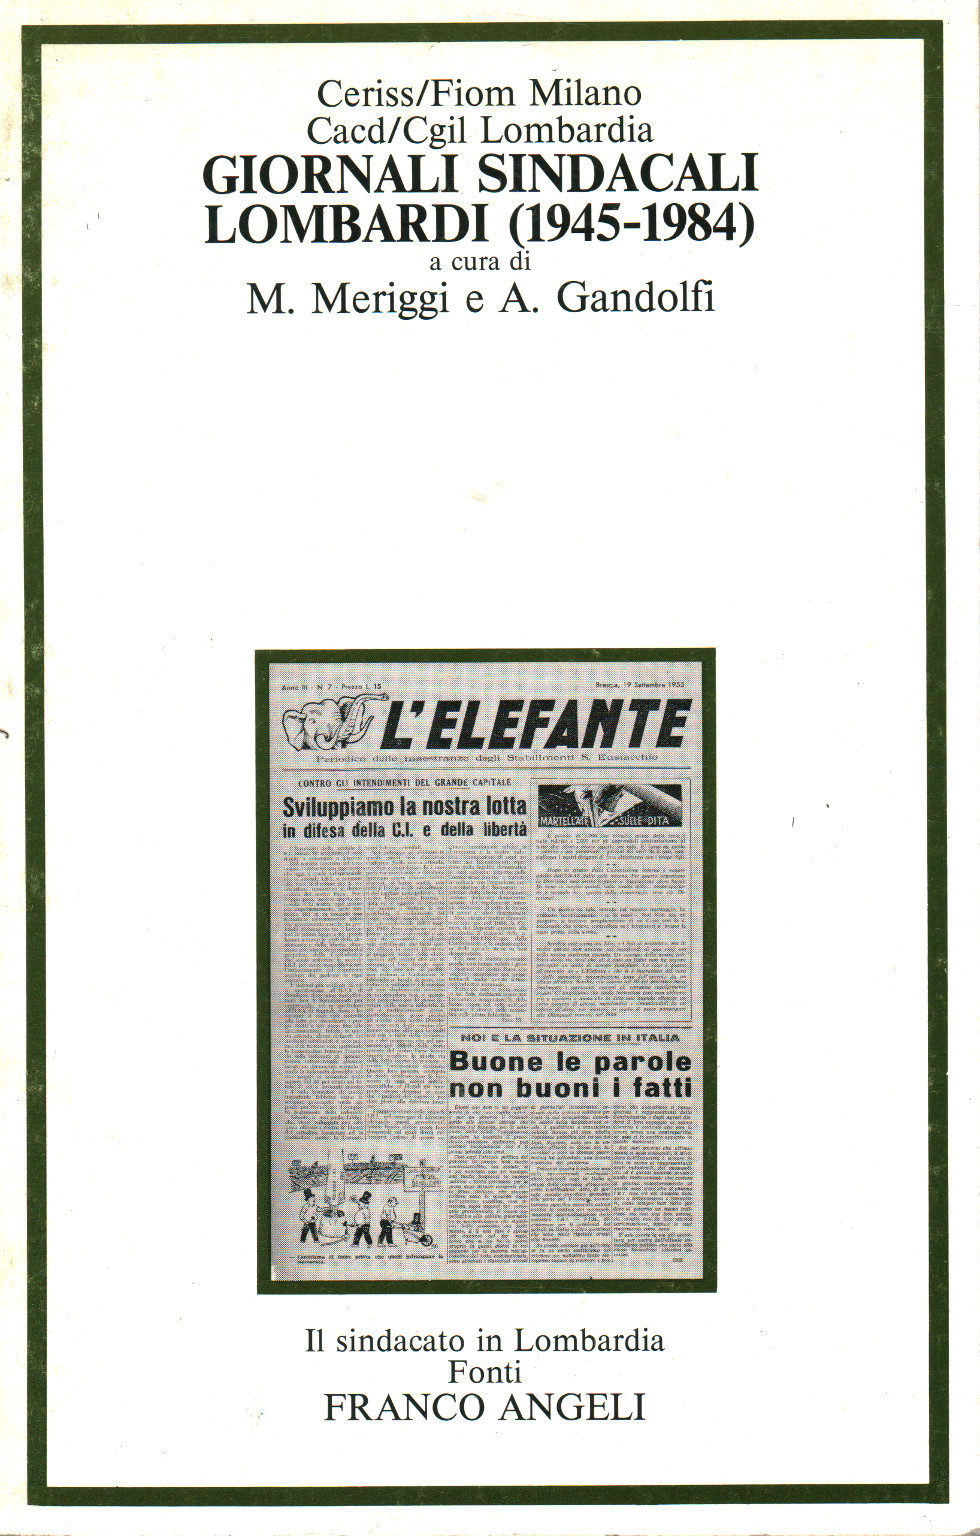 Newspapers, trade unions lombardi (1945-1984), s.a.